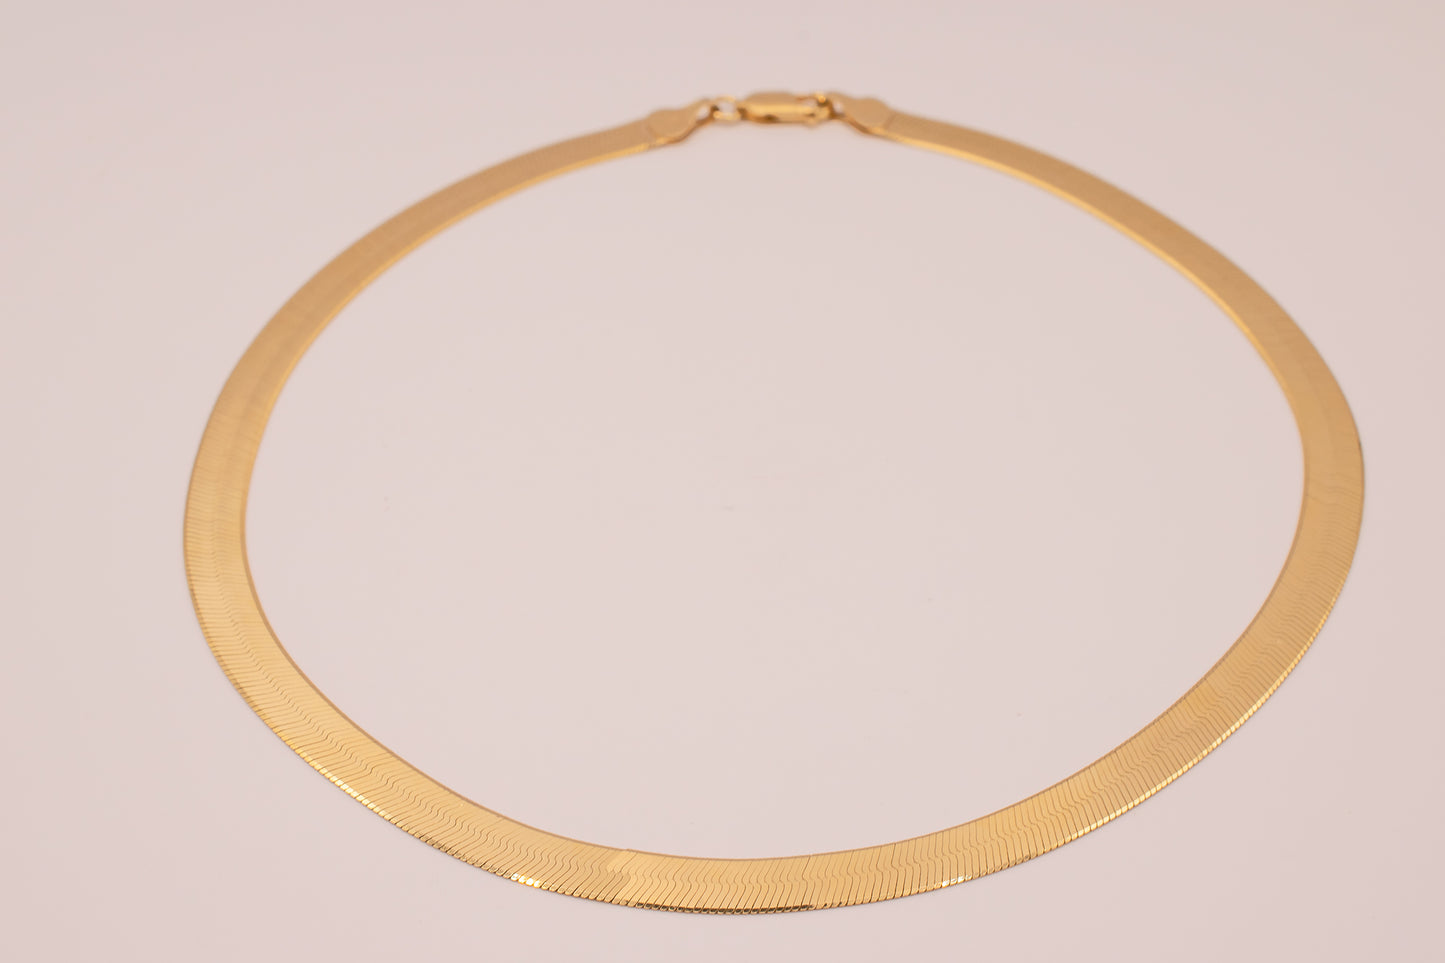 Vintage Unisex Solid 14k Yellow Gold 6.7mm Herringbone Necklace Chain 15 1/2 Inches